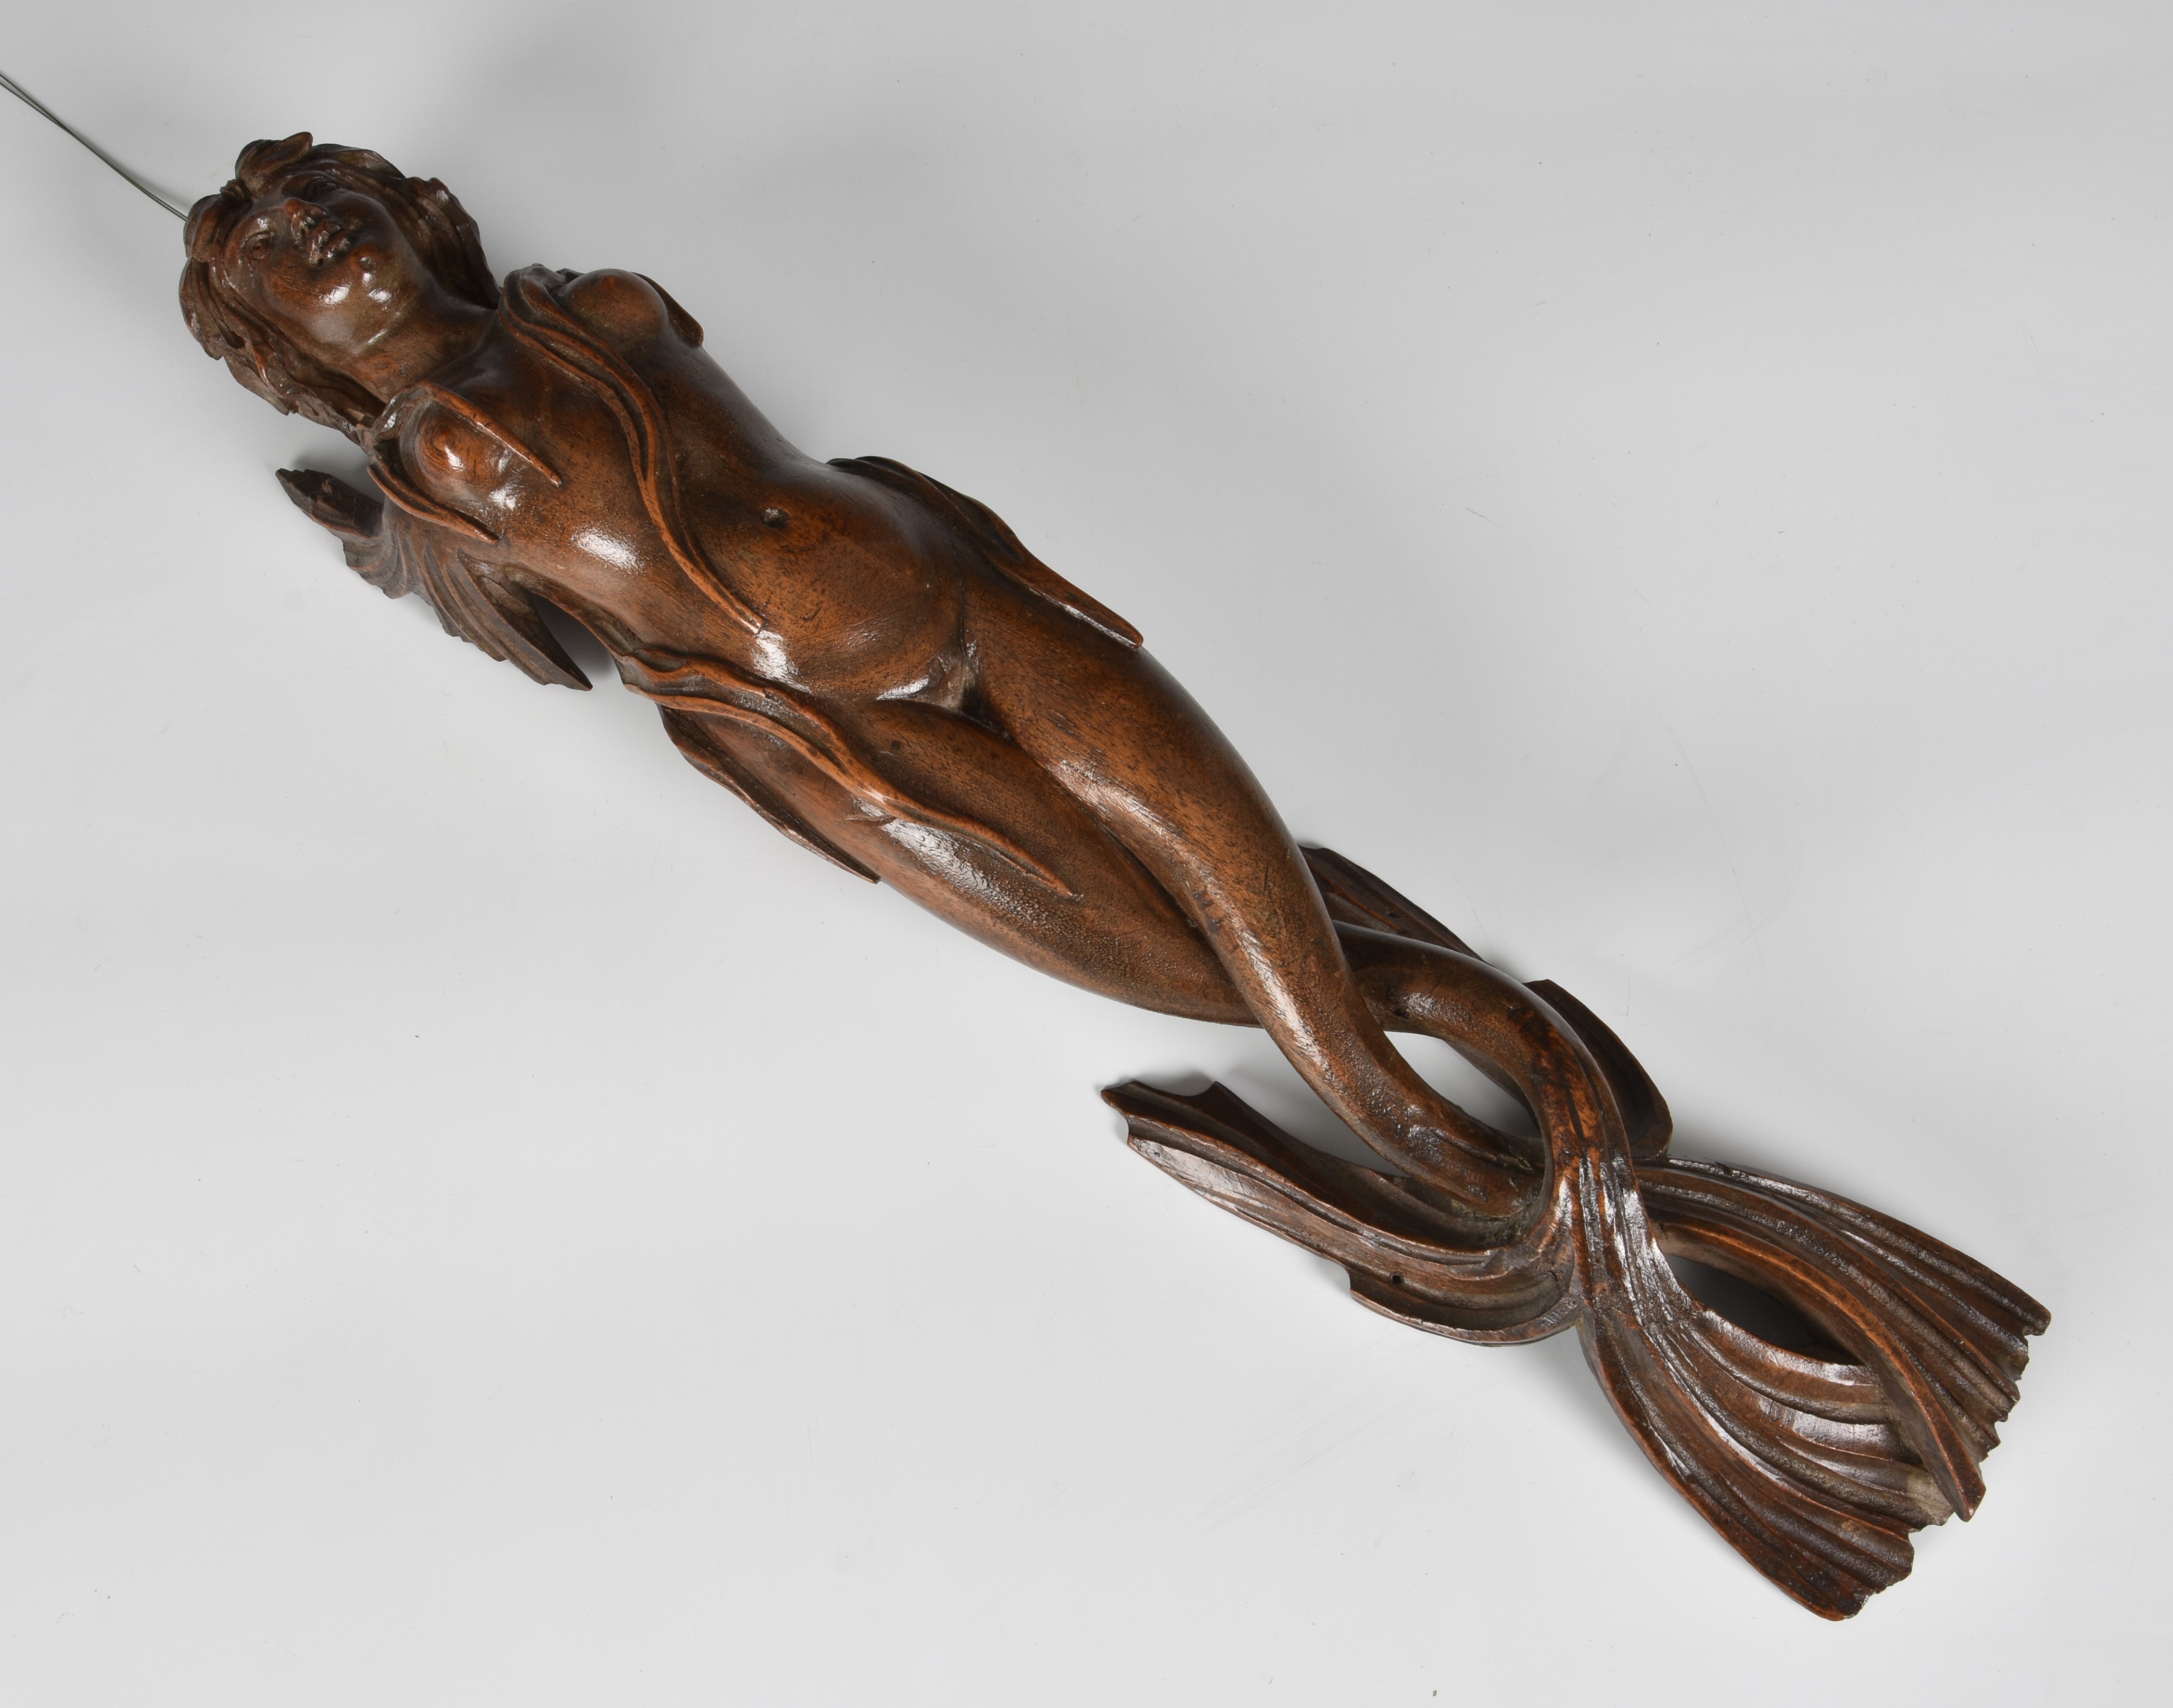 A carved wooden wall applique figure of a mermaid, probably 19th century, with short, fin-style